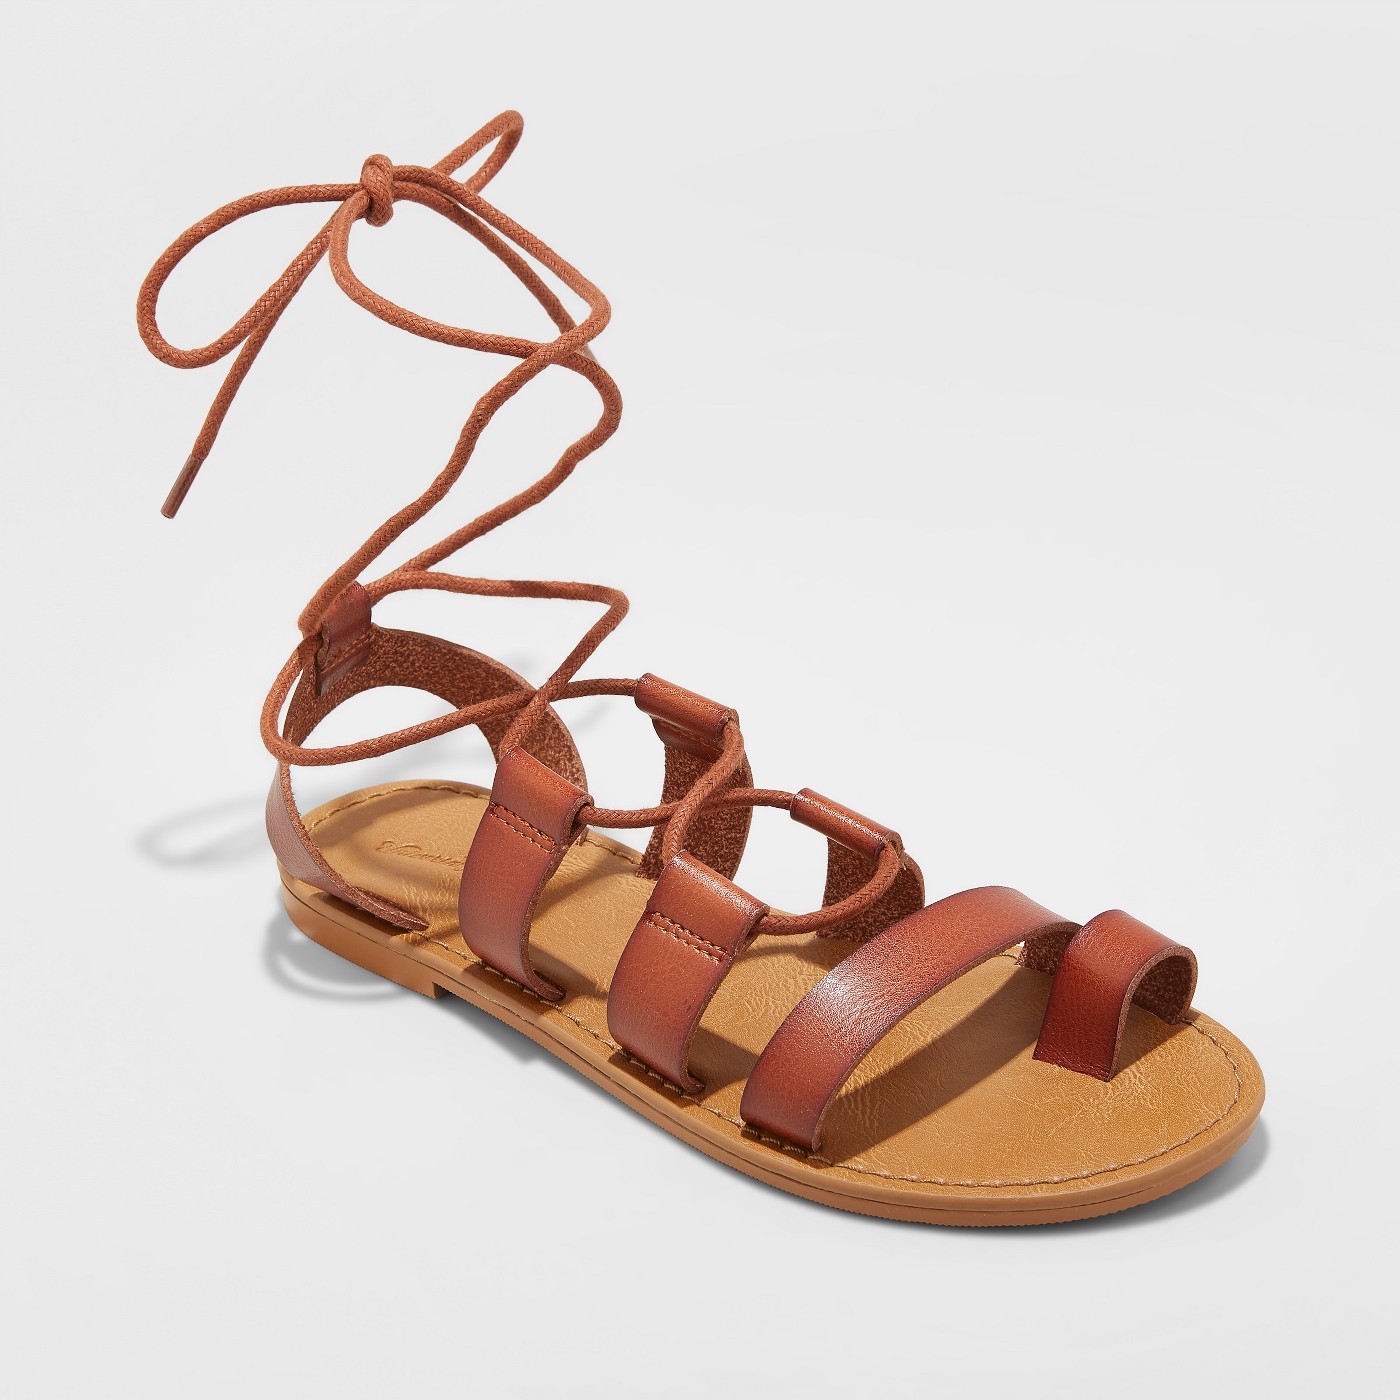 Women's Paige Lace Up Gladiator Sandals - Universal Thread™ - image 1 of 3